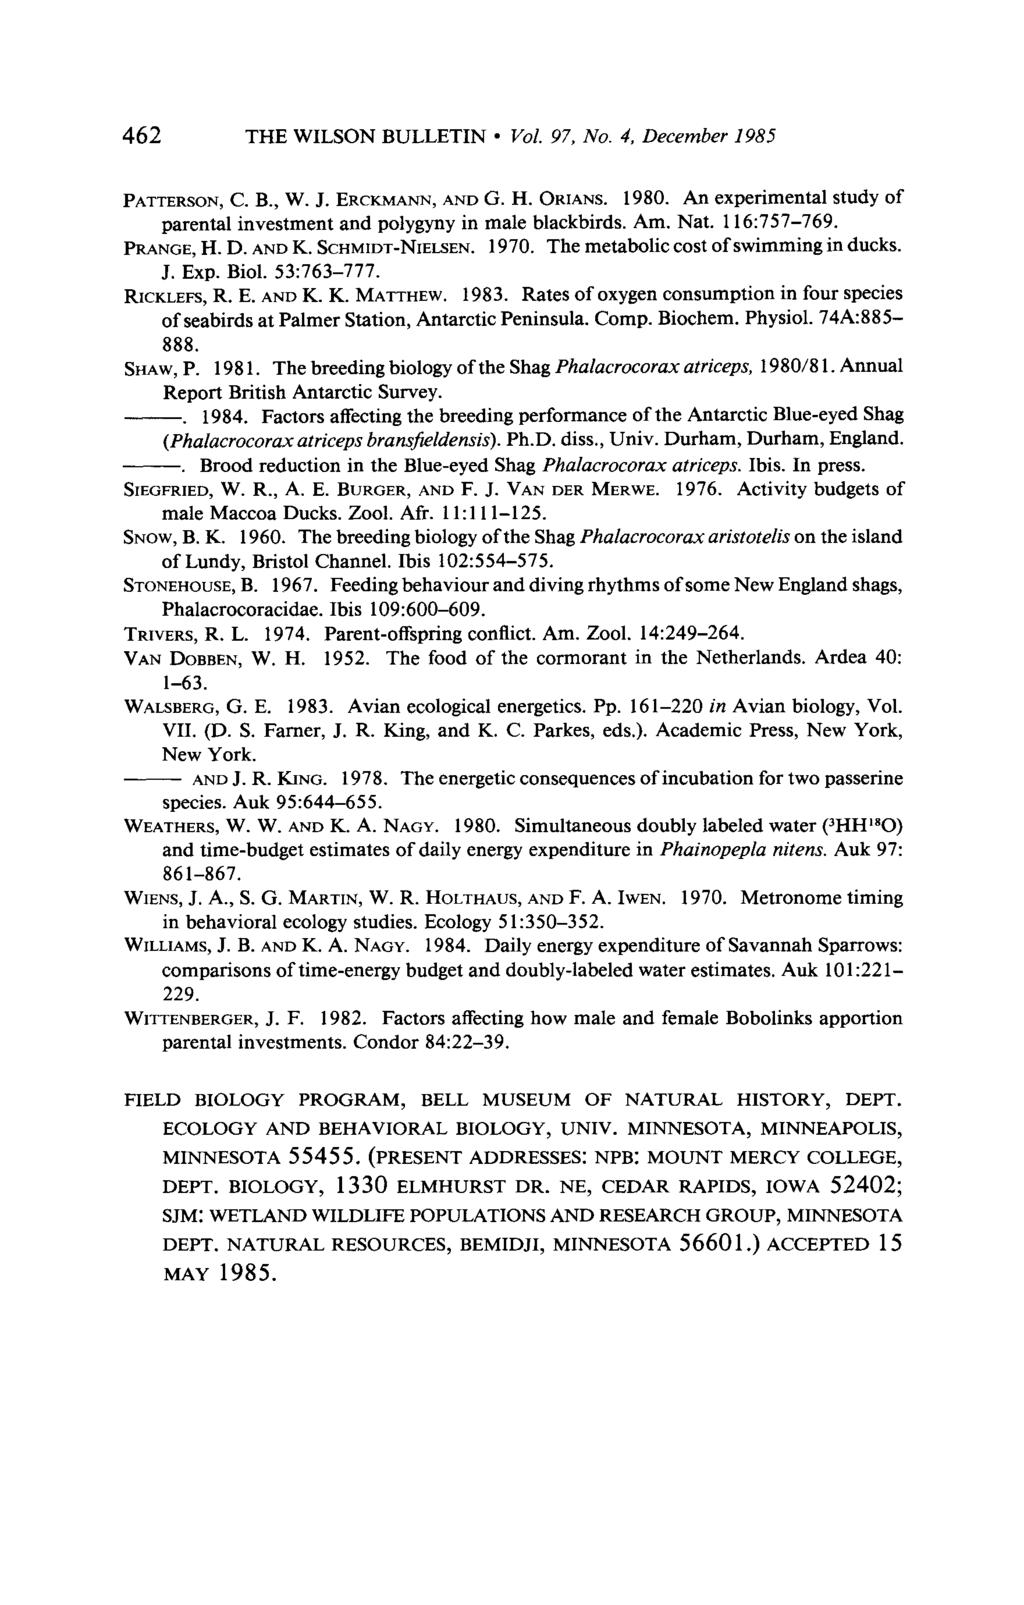 462 THE WILSON BULLETIN l Vol. 97, No. 4, December 1985 PATTERSON, C. B., W. J. ERCKMANN, AND G. H. ORIANS. 1980. An experimental study of parental investment and polygyny in male blackbirds. Am. Nat.